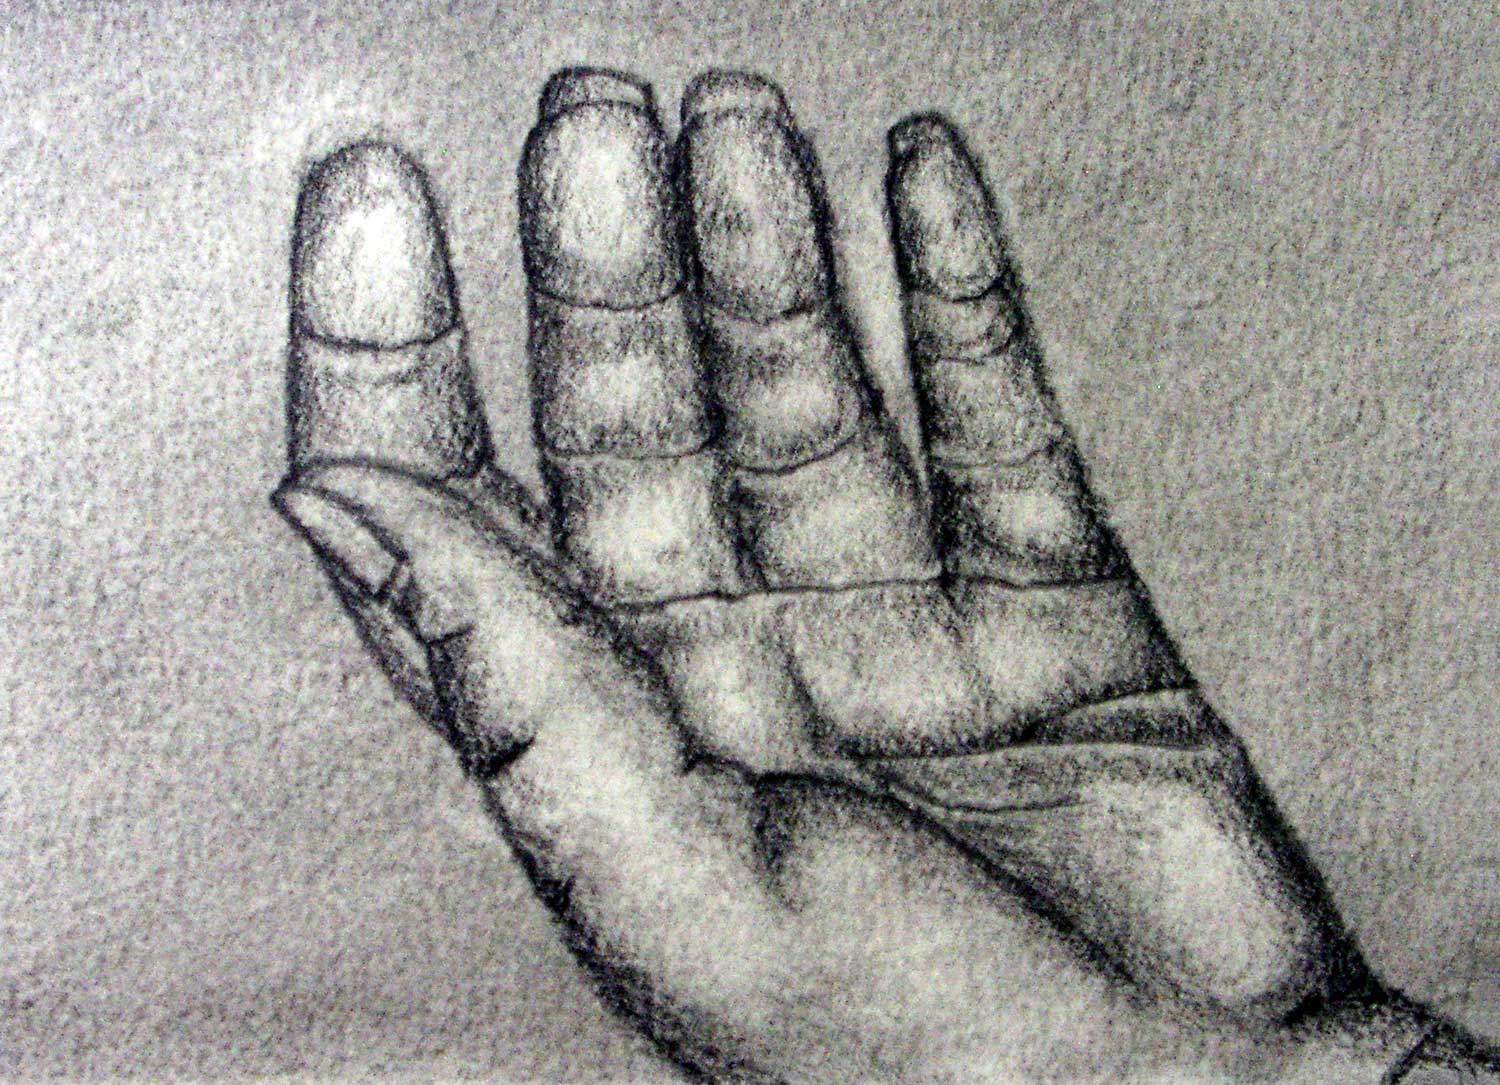 Student artwork of a hand